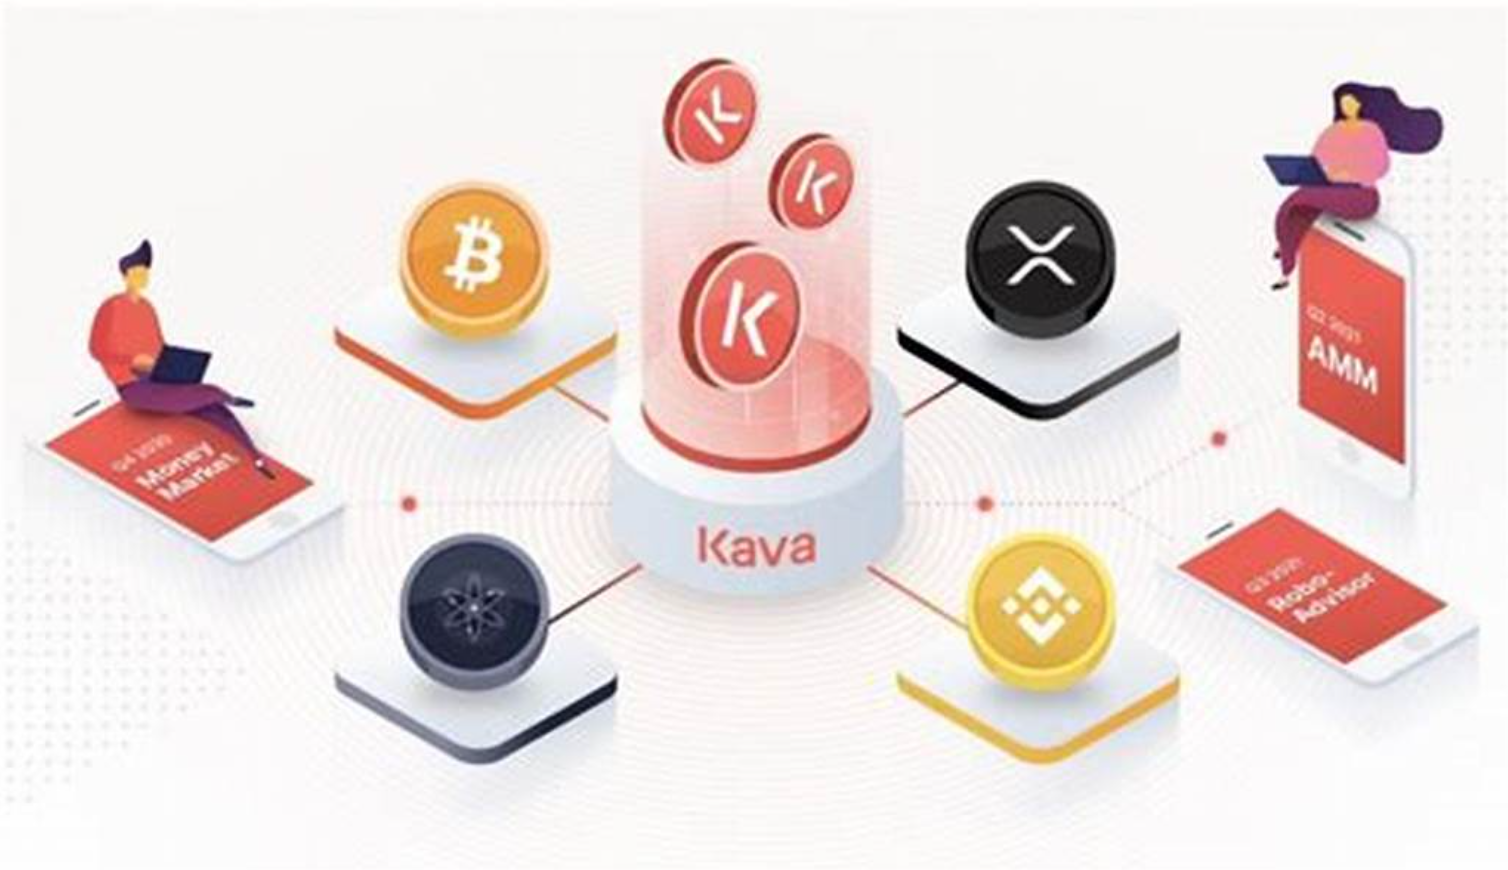 What is Kava crypto